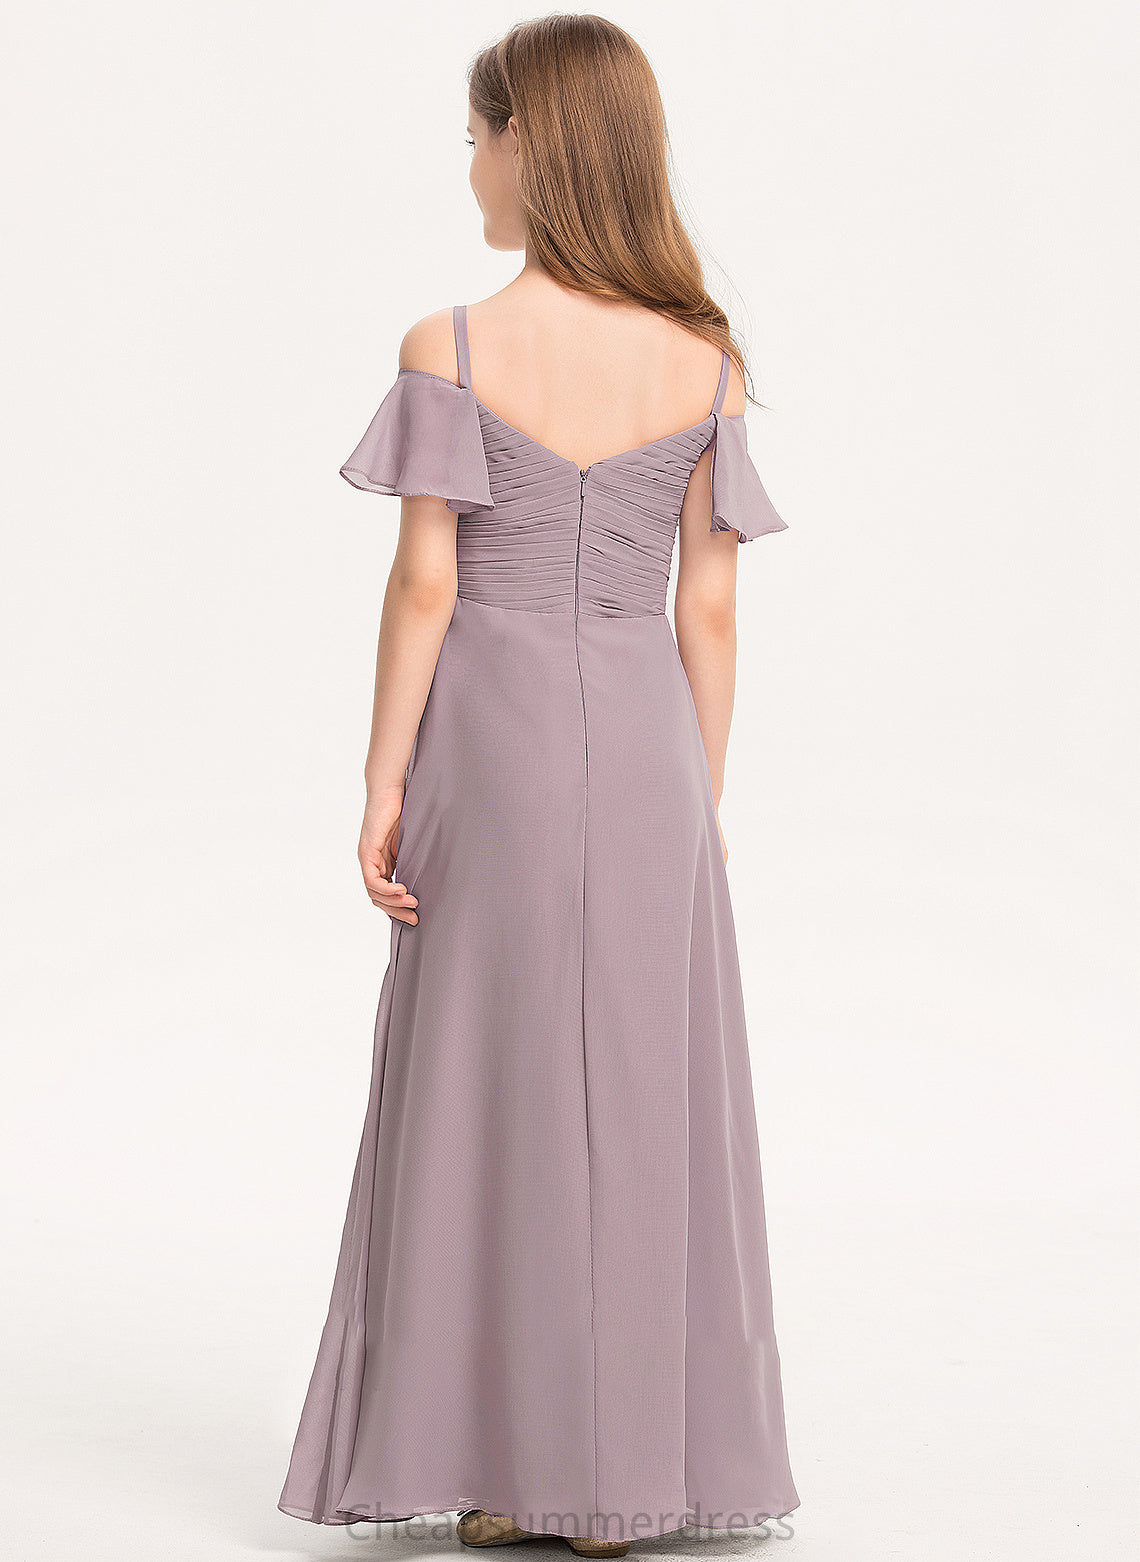 With Floor-Length Chiffon Ruffle Claudia A-Line Junior Bridesmaid Dresses Off-the-Shoulder